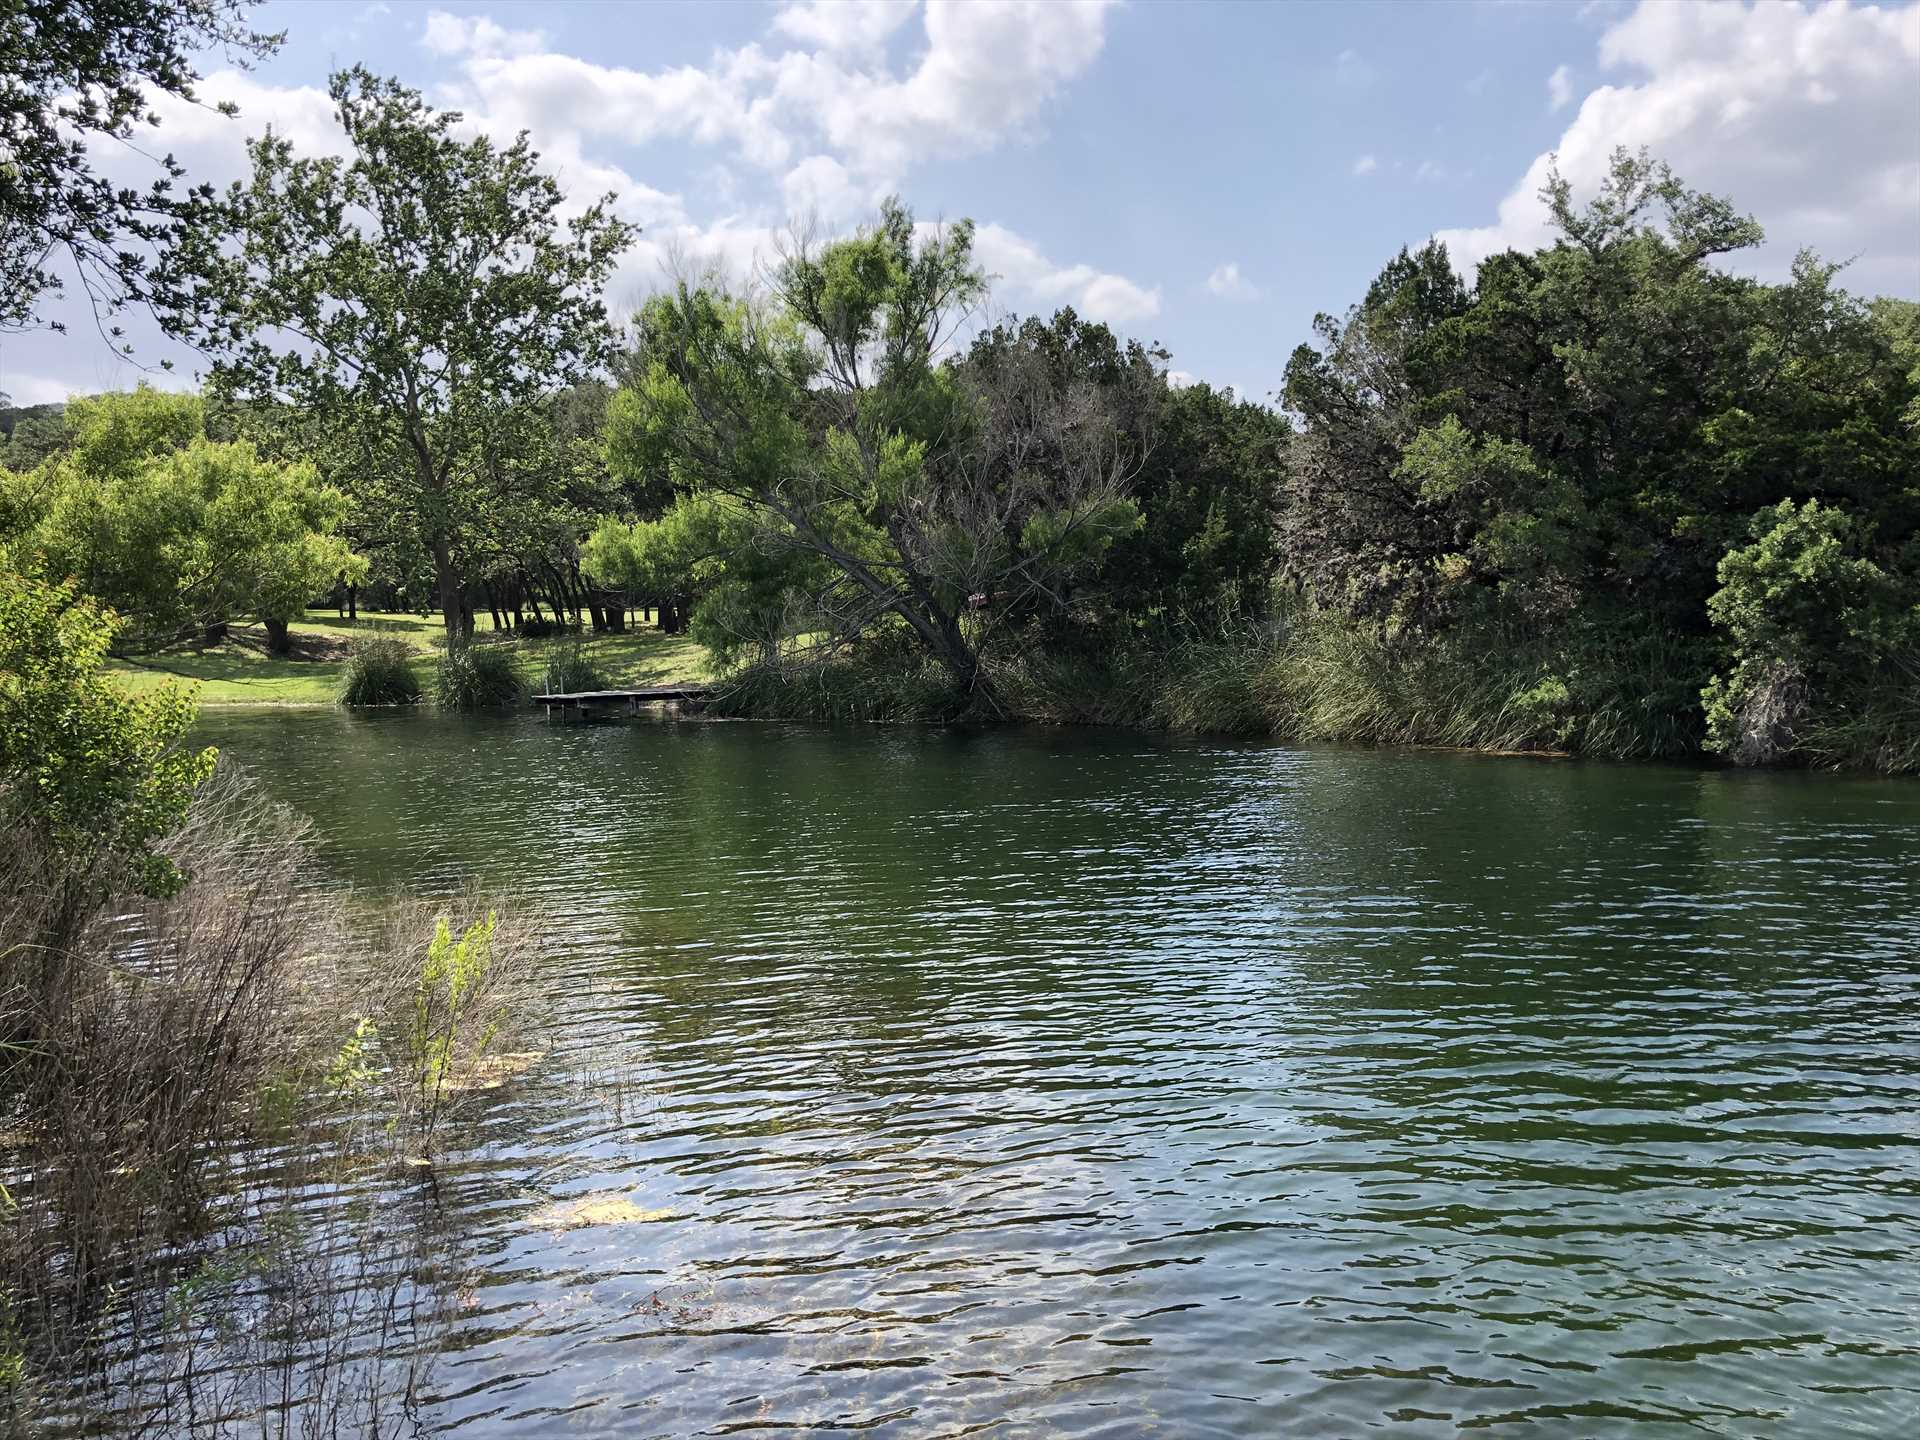                                                 55 acres of Hill Country beauty, with private access to a peaceful, bubbling creek...it's a nature-lover's paradise!